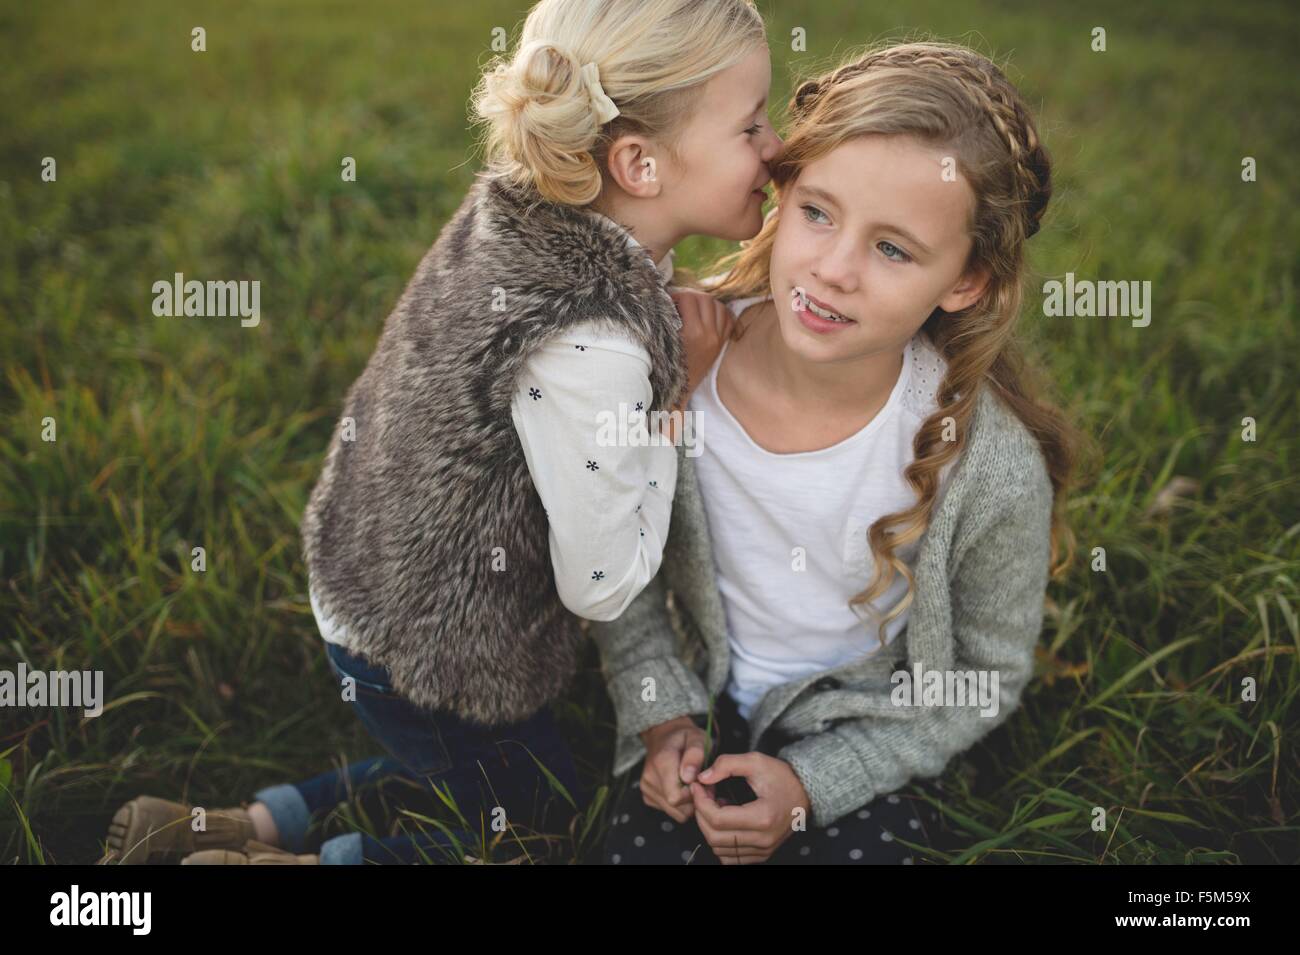 Young girl whispering in sister's ear, outdoors Stock Photo